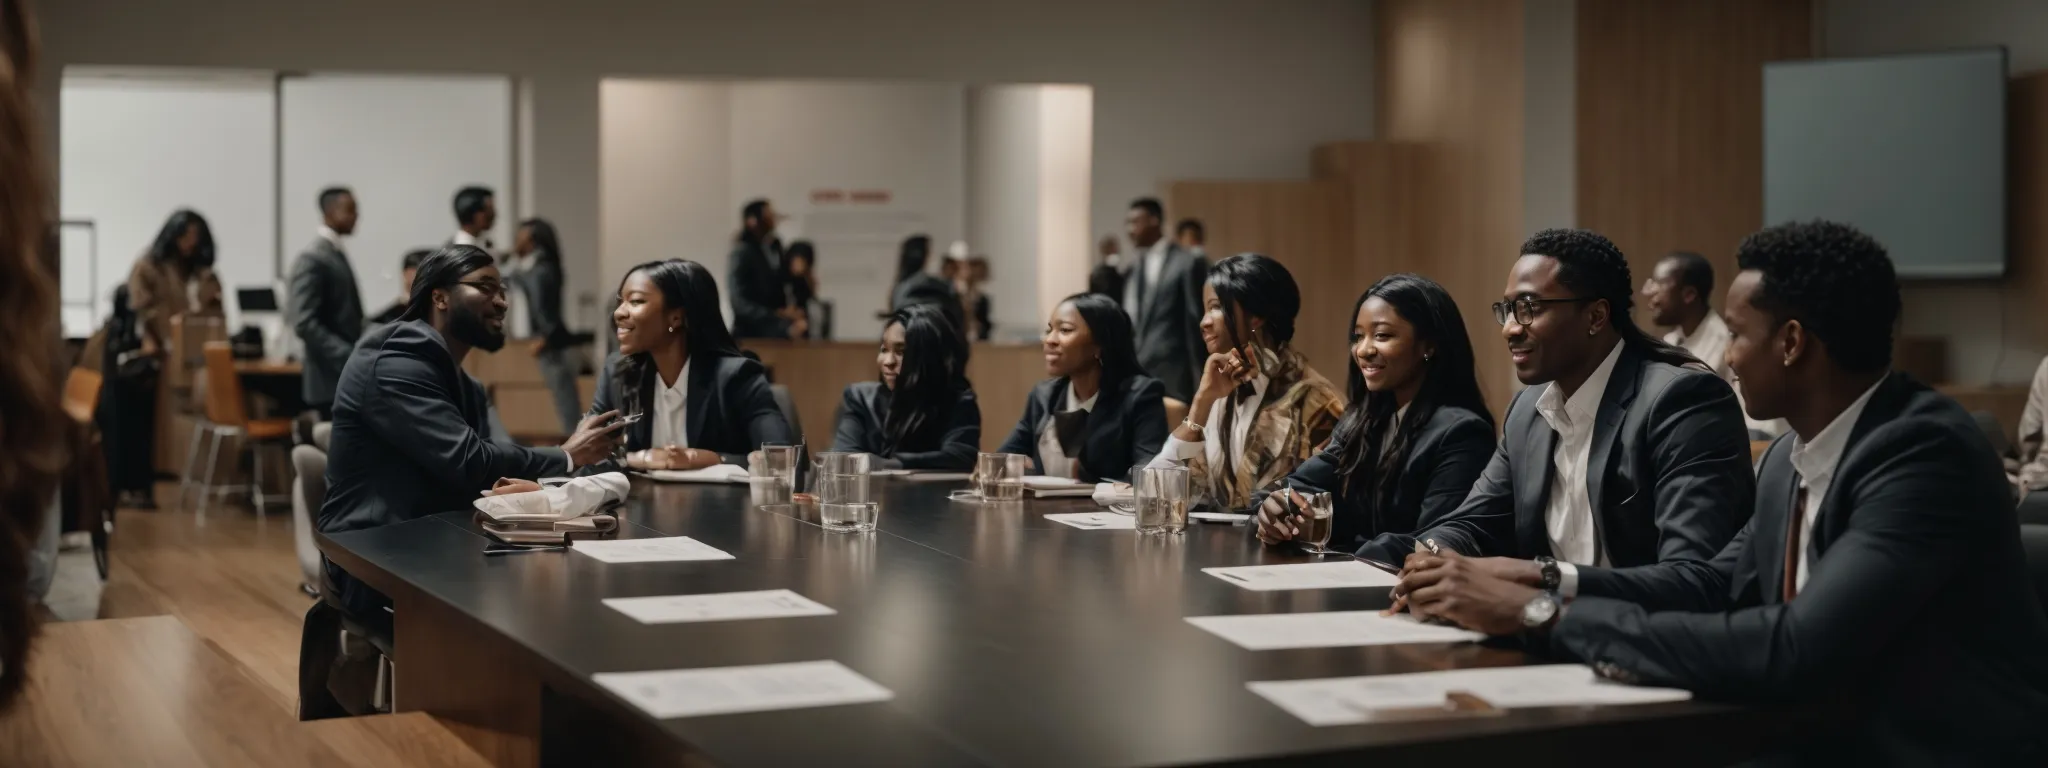 a collective of diverse individuals engaging in animated conversation around a large conference table.